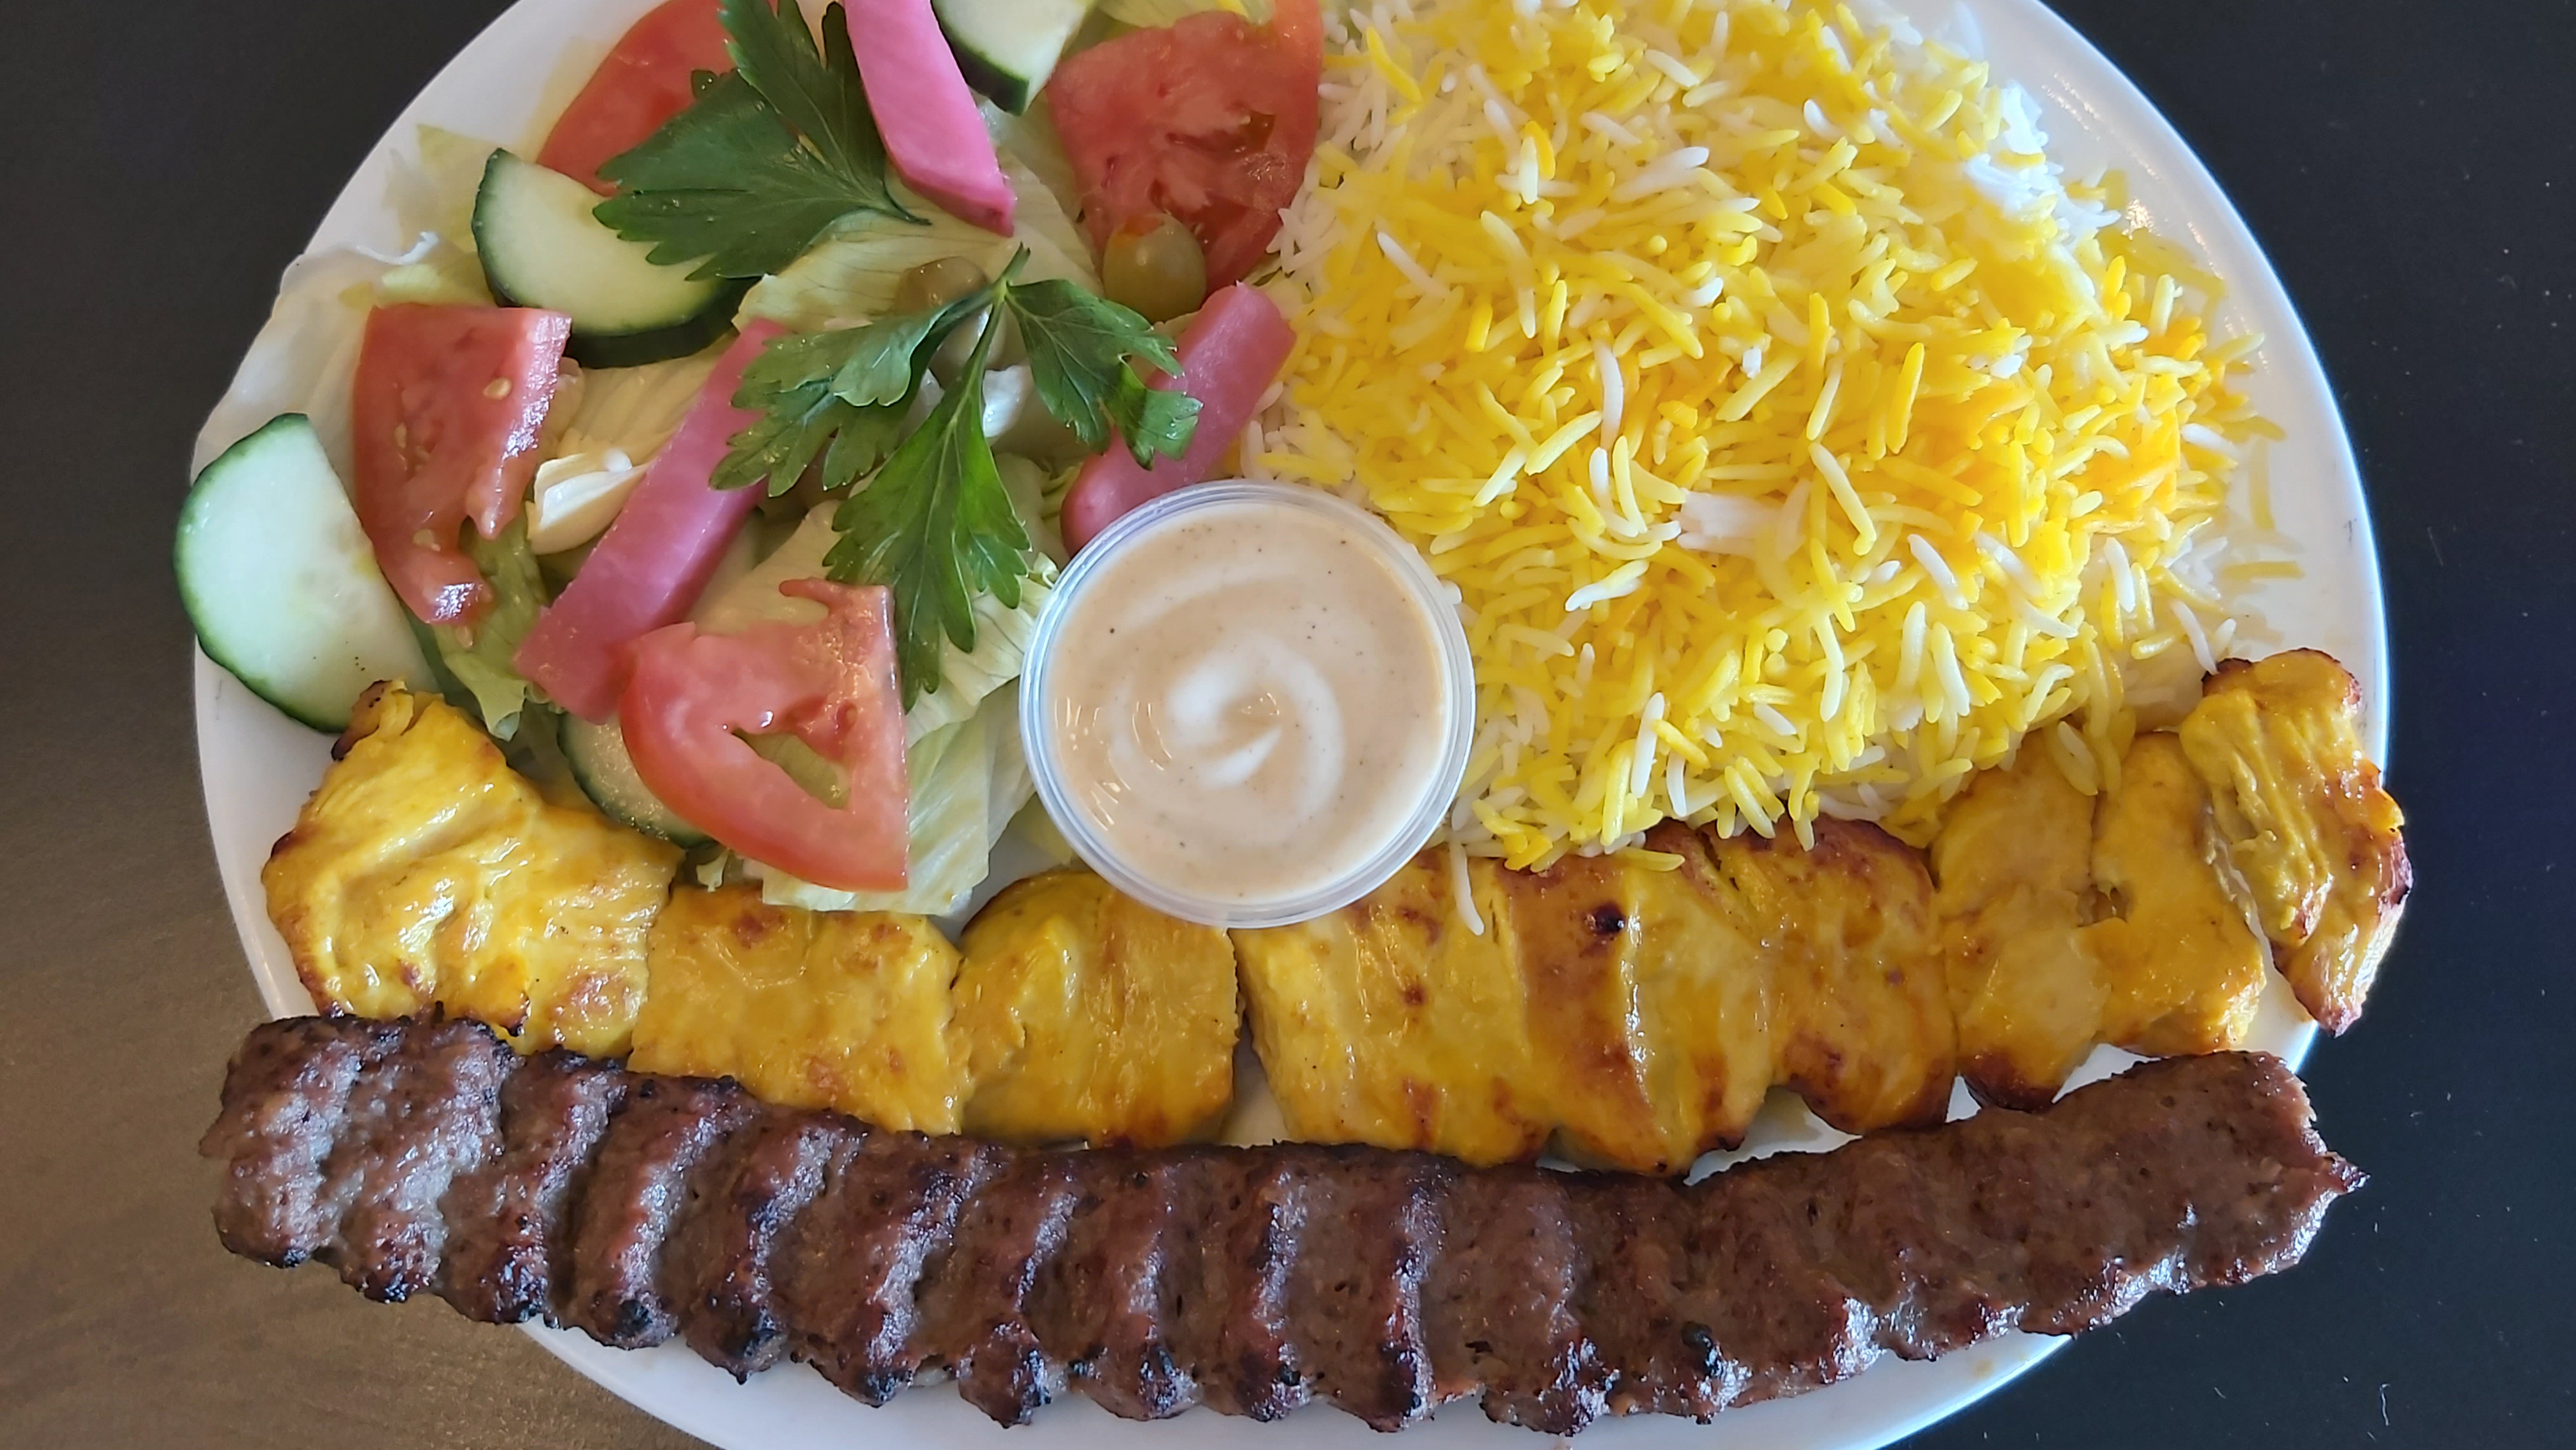 Grilled chicken and Koobideh kebab with sauce, rice, and salad